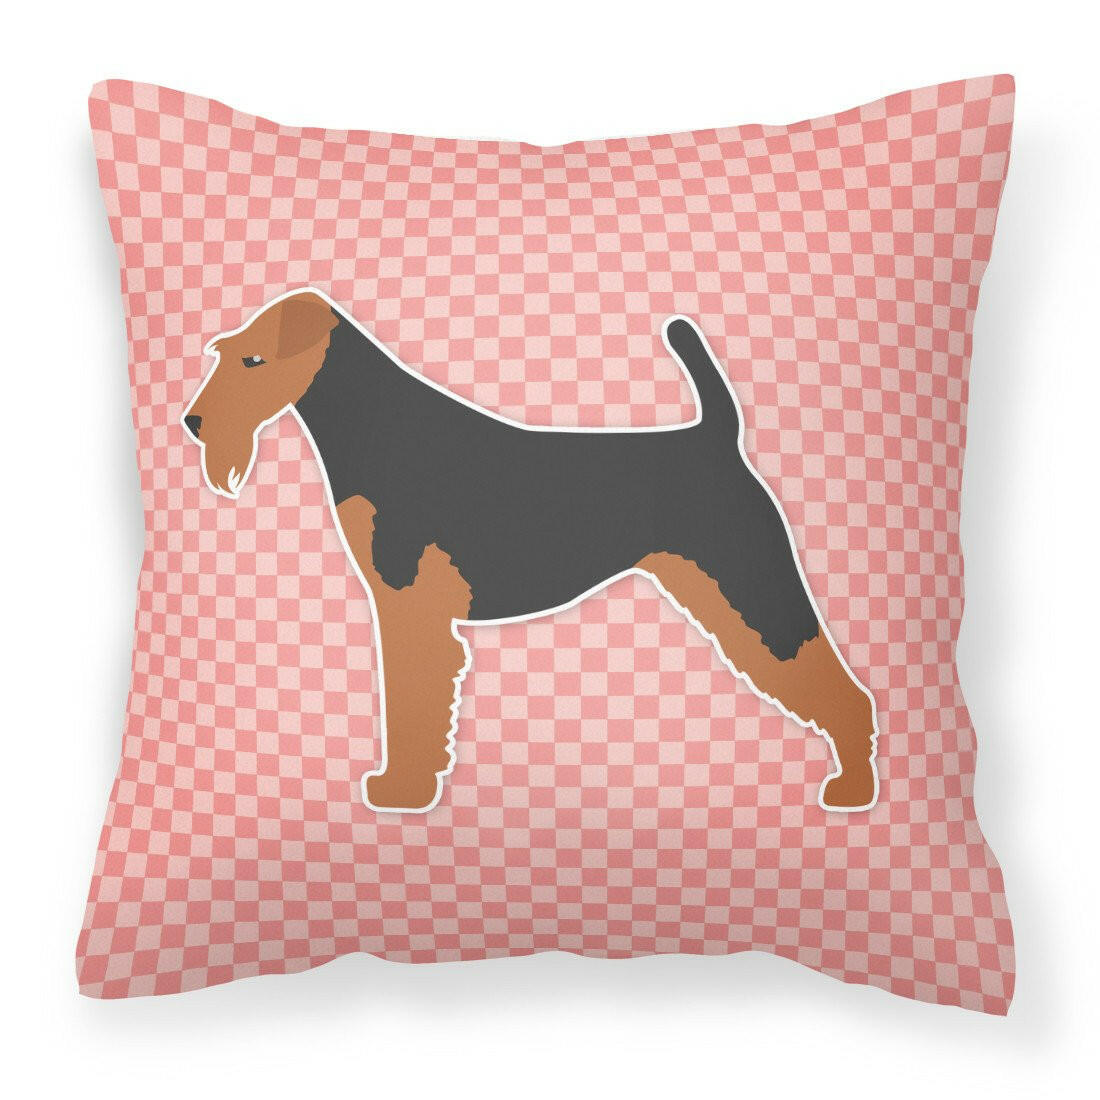 Welsh Terrier Checkerboard Pink Fabric Decorative Pillow BB3585PW1818 by Caroline's Treasures